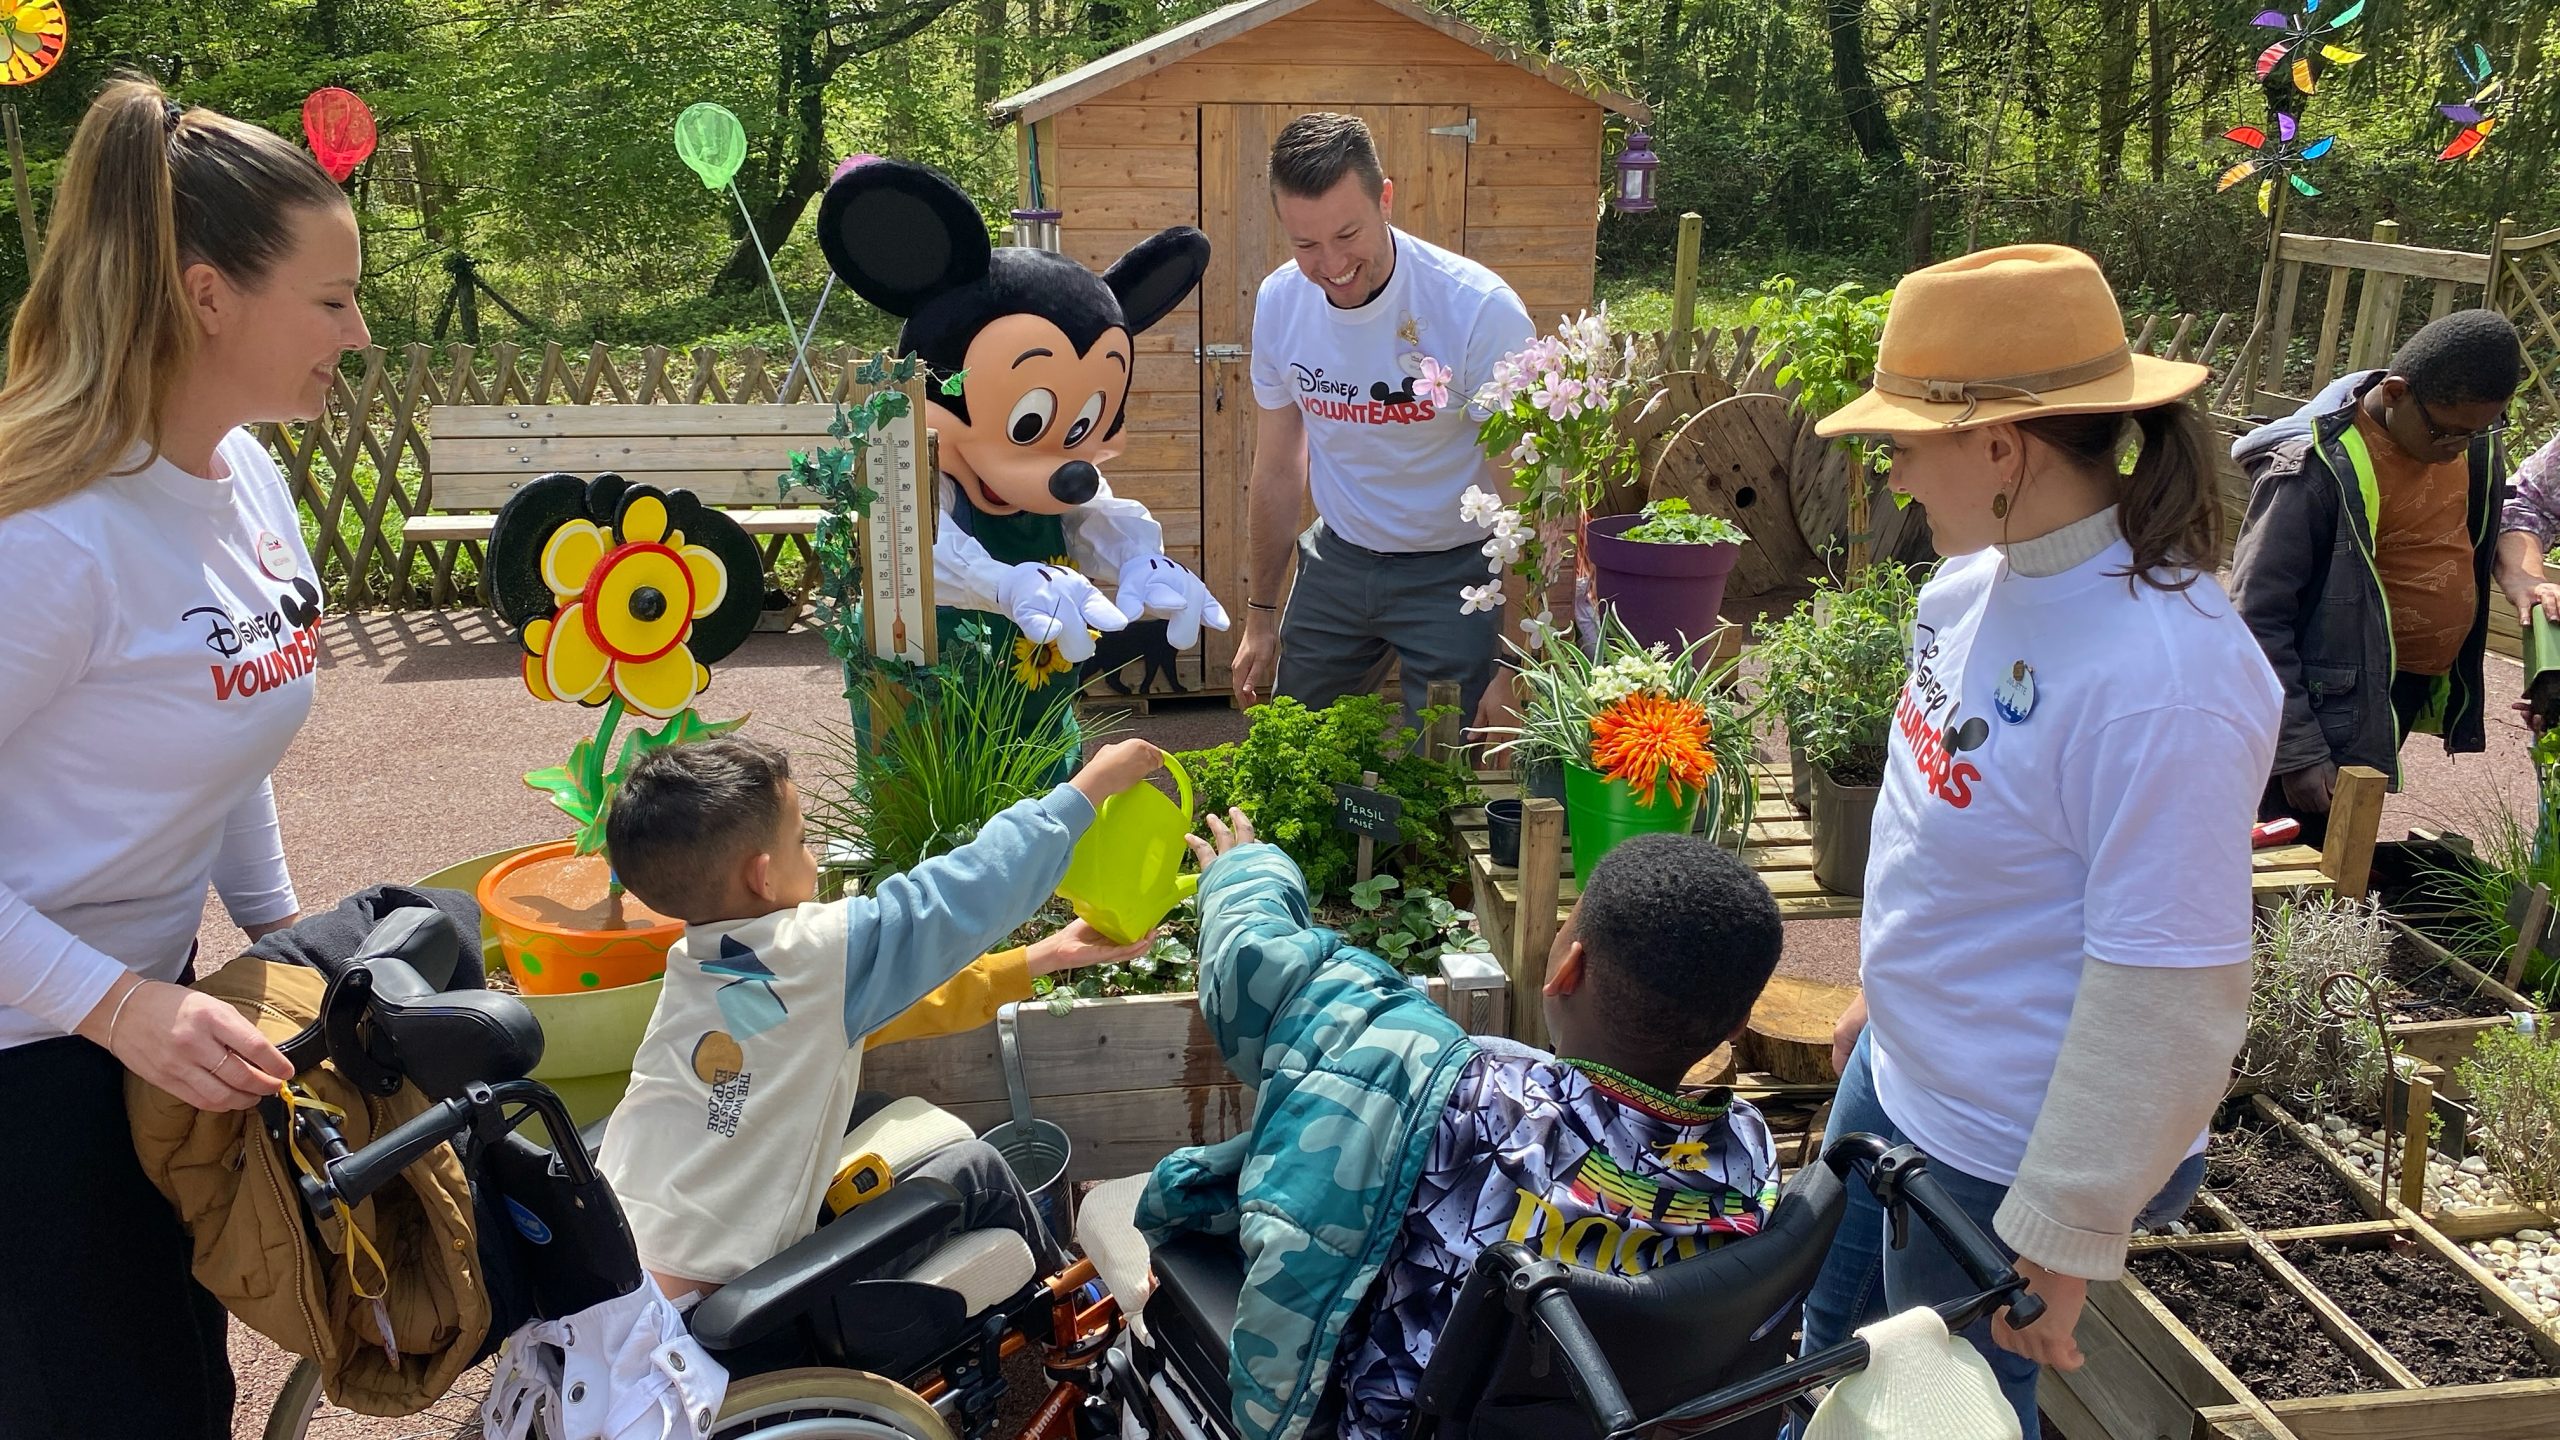 Mikcey Mouse and Disney VoluntEARS interact with the community